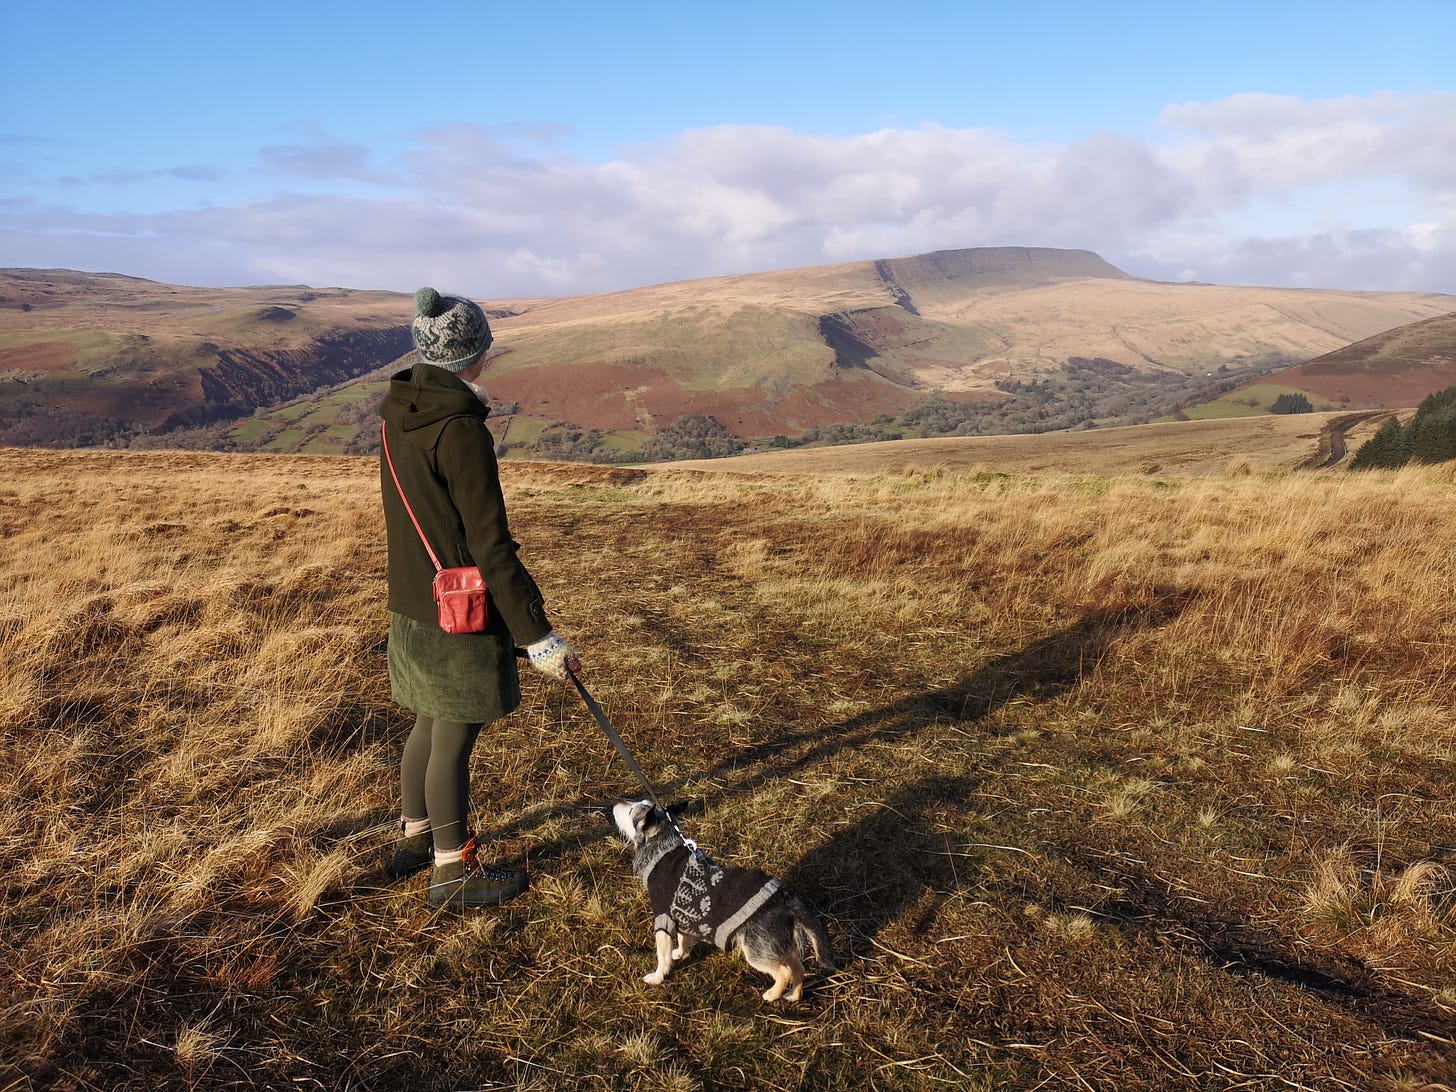 Katie the human and Jack the dog stand gazing from the top of a hill, over to the mountain on the other side of the valley. The sky is blue with some low clouds, and the ground is bare and brown. Both human and dog are wrapped up in handknits.